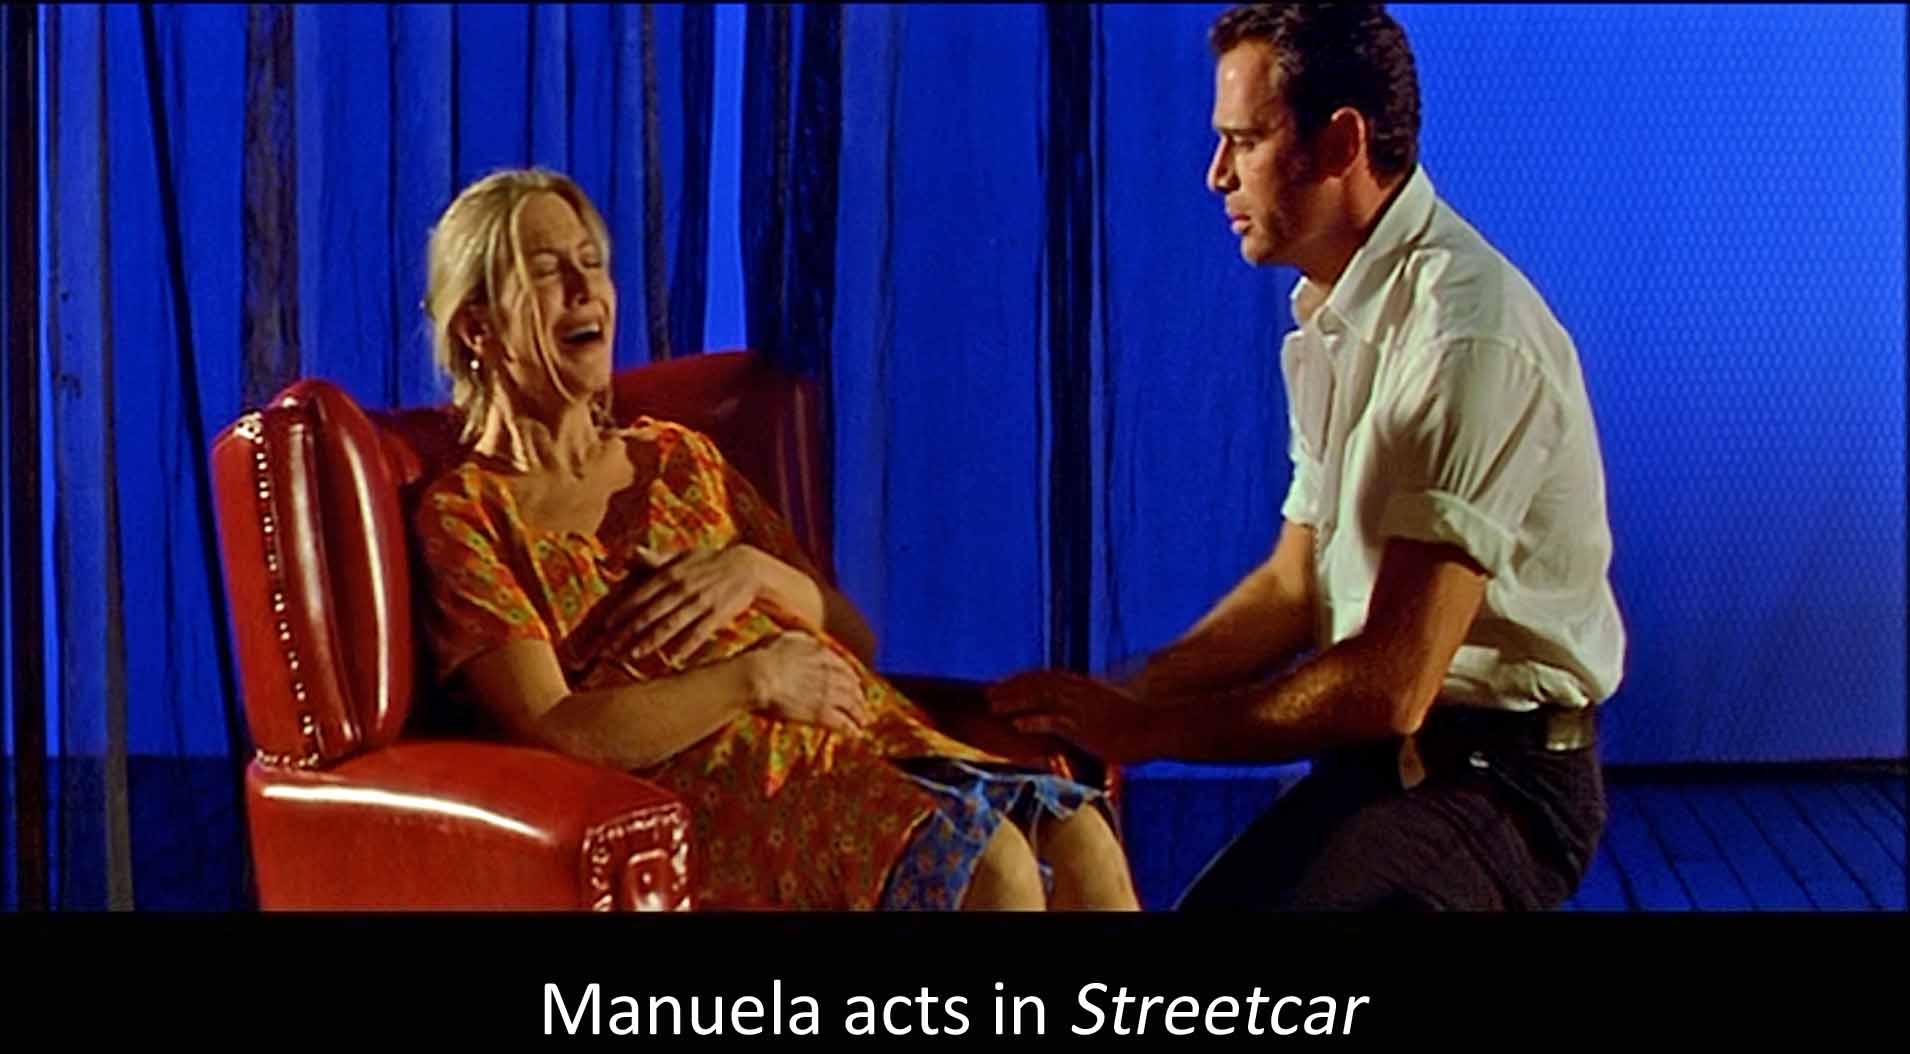 Manuela acts in Streetcar